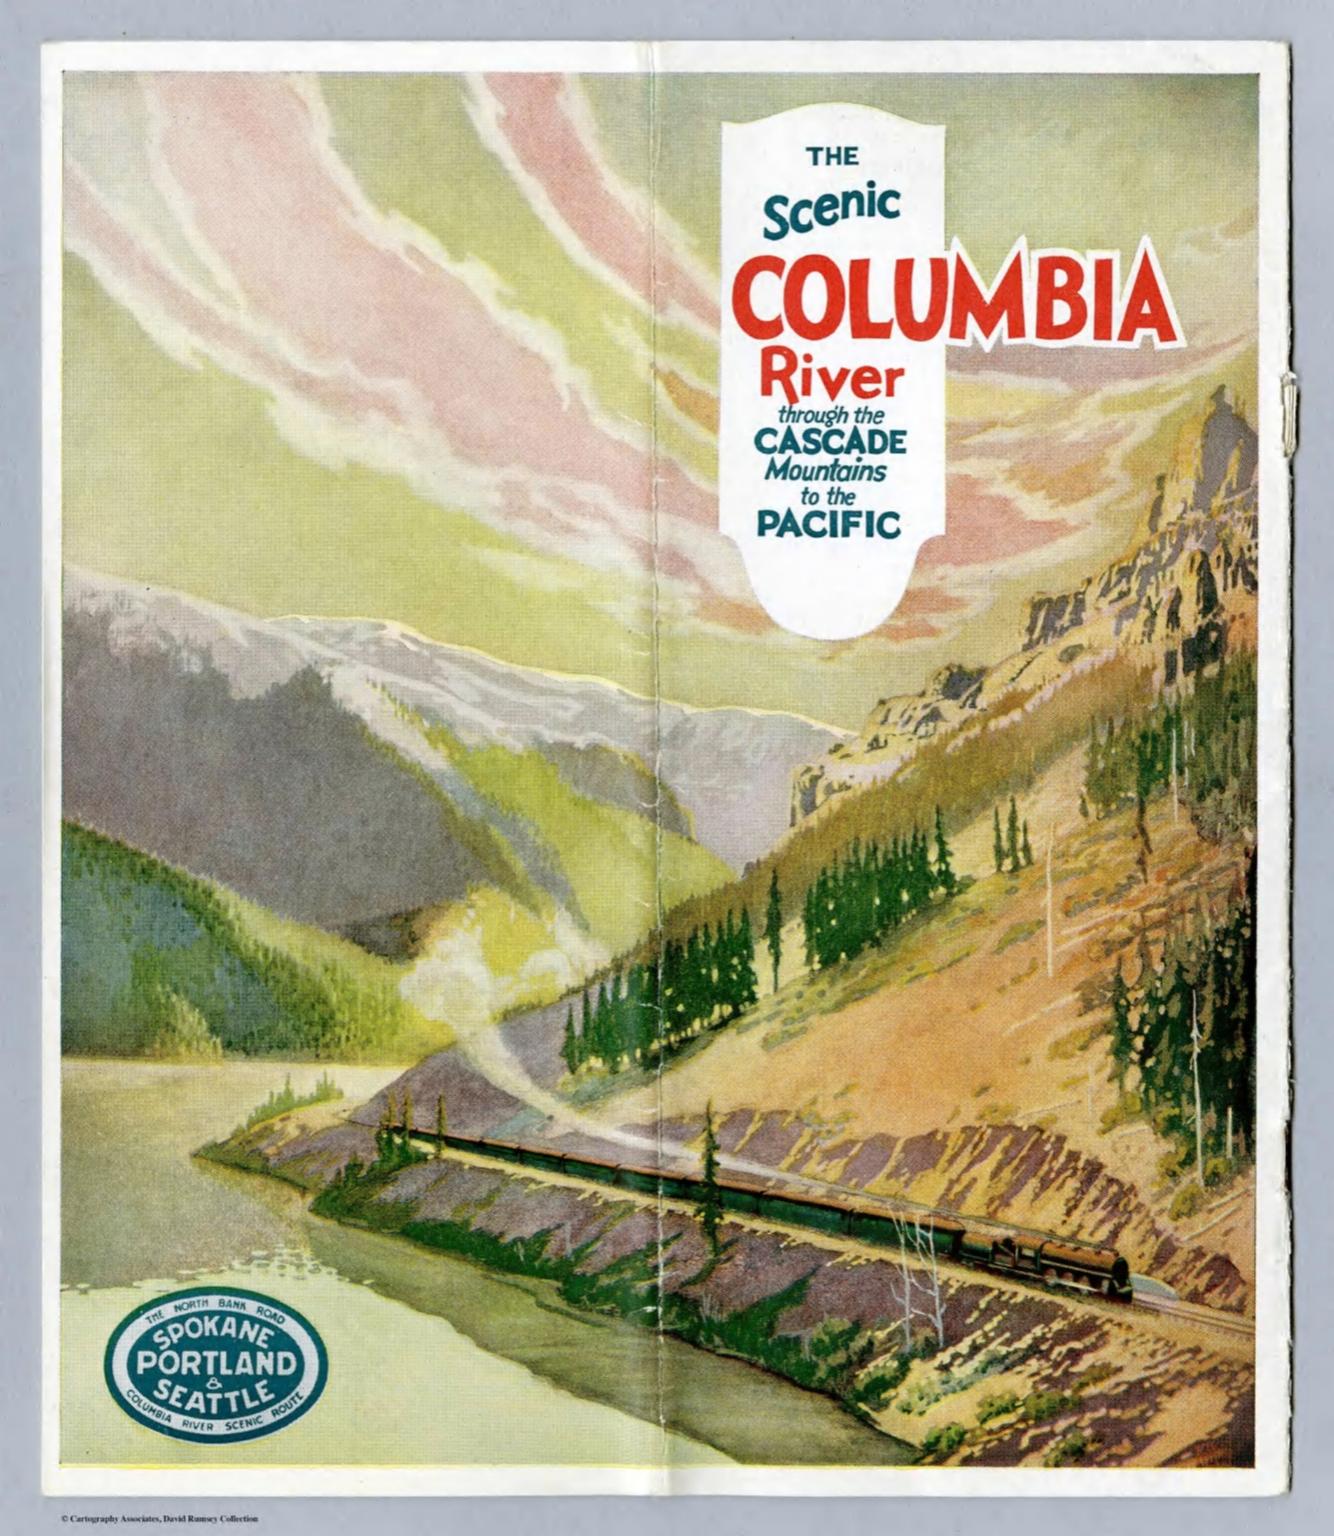 Covers: The Scenic Columbia River through the Cascade Mountains to the Pacific.